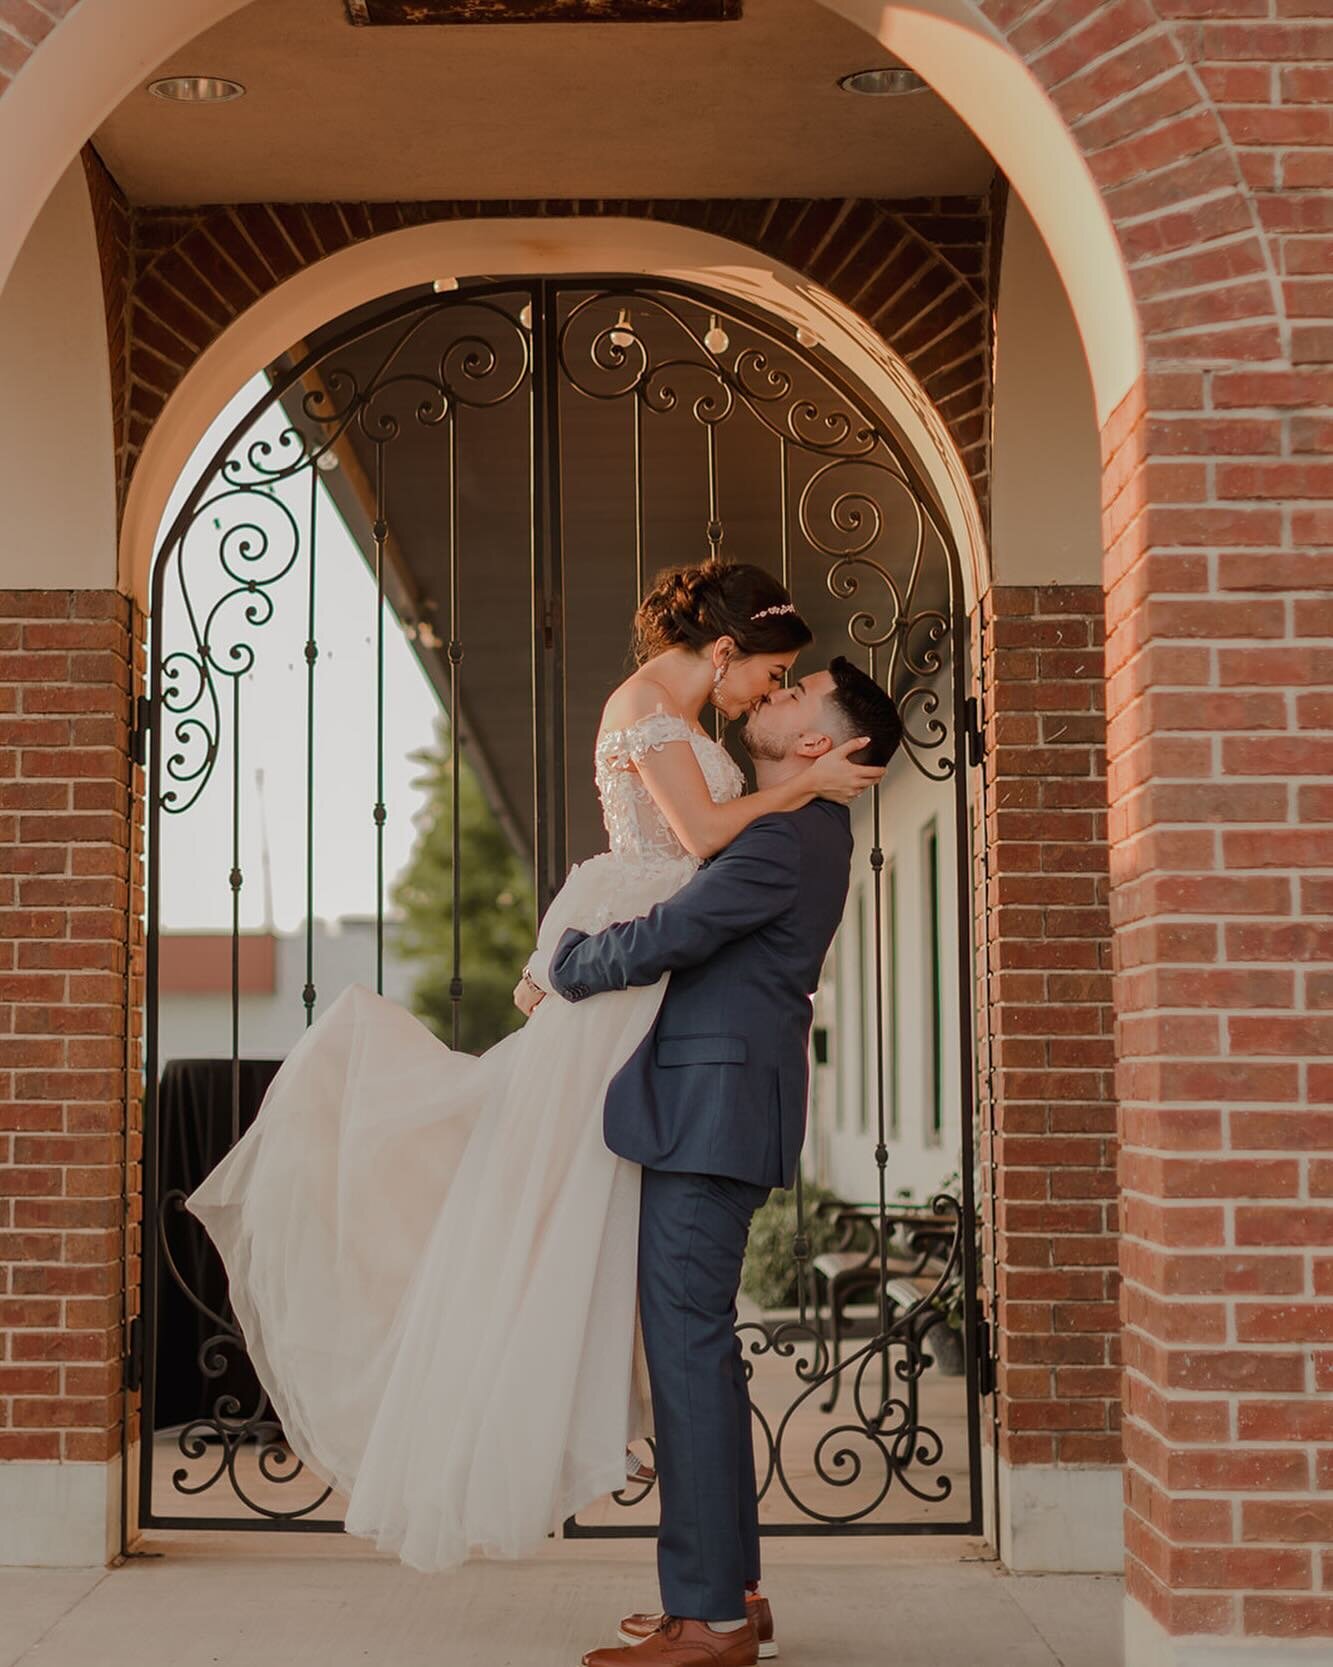 We love our iconic archways 😍 Perfect for newlywed photos! ⁠
⁠
⁠
Are you recently engaged and looking for an all inclusive venue? Contact us to get started:⁠
📞281-402-5429⁠
✉️info@gatesonmain.com⁠
🖥www.gatesonmain.com⁠
⁠
Venue @thegatesonmain⁠
Pho